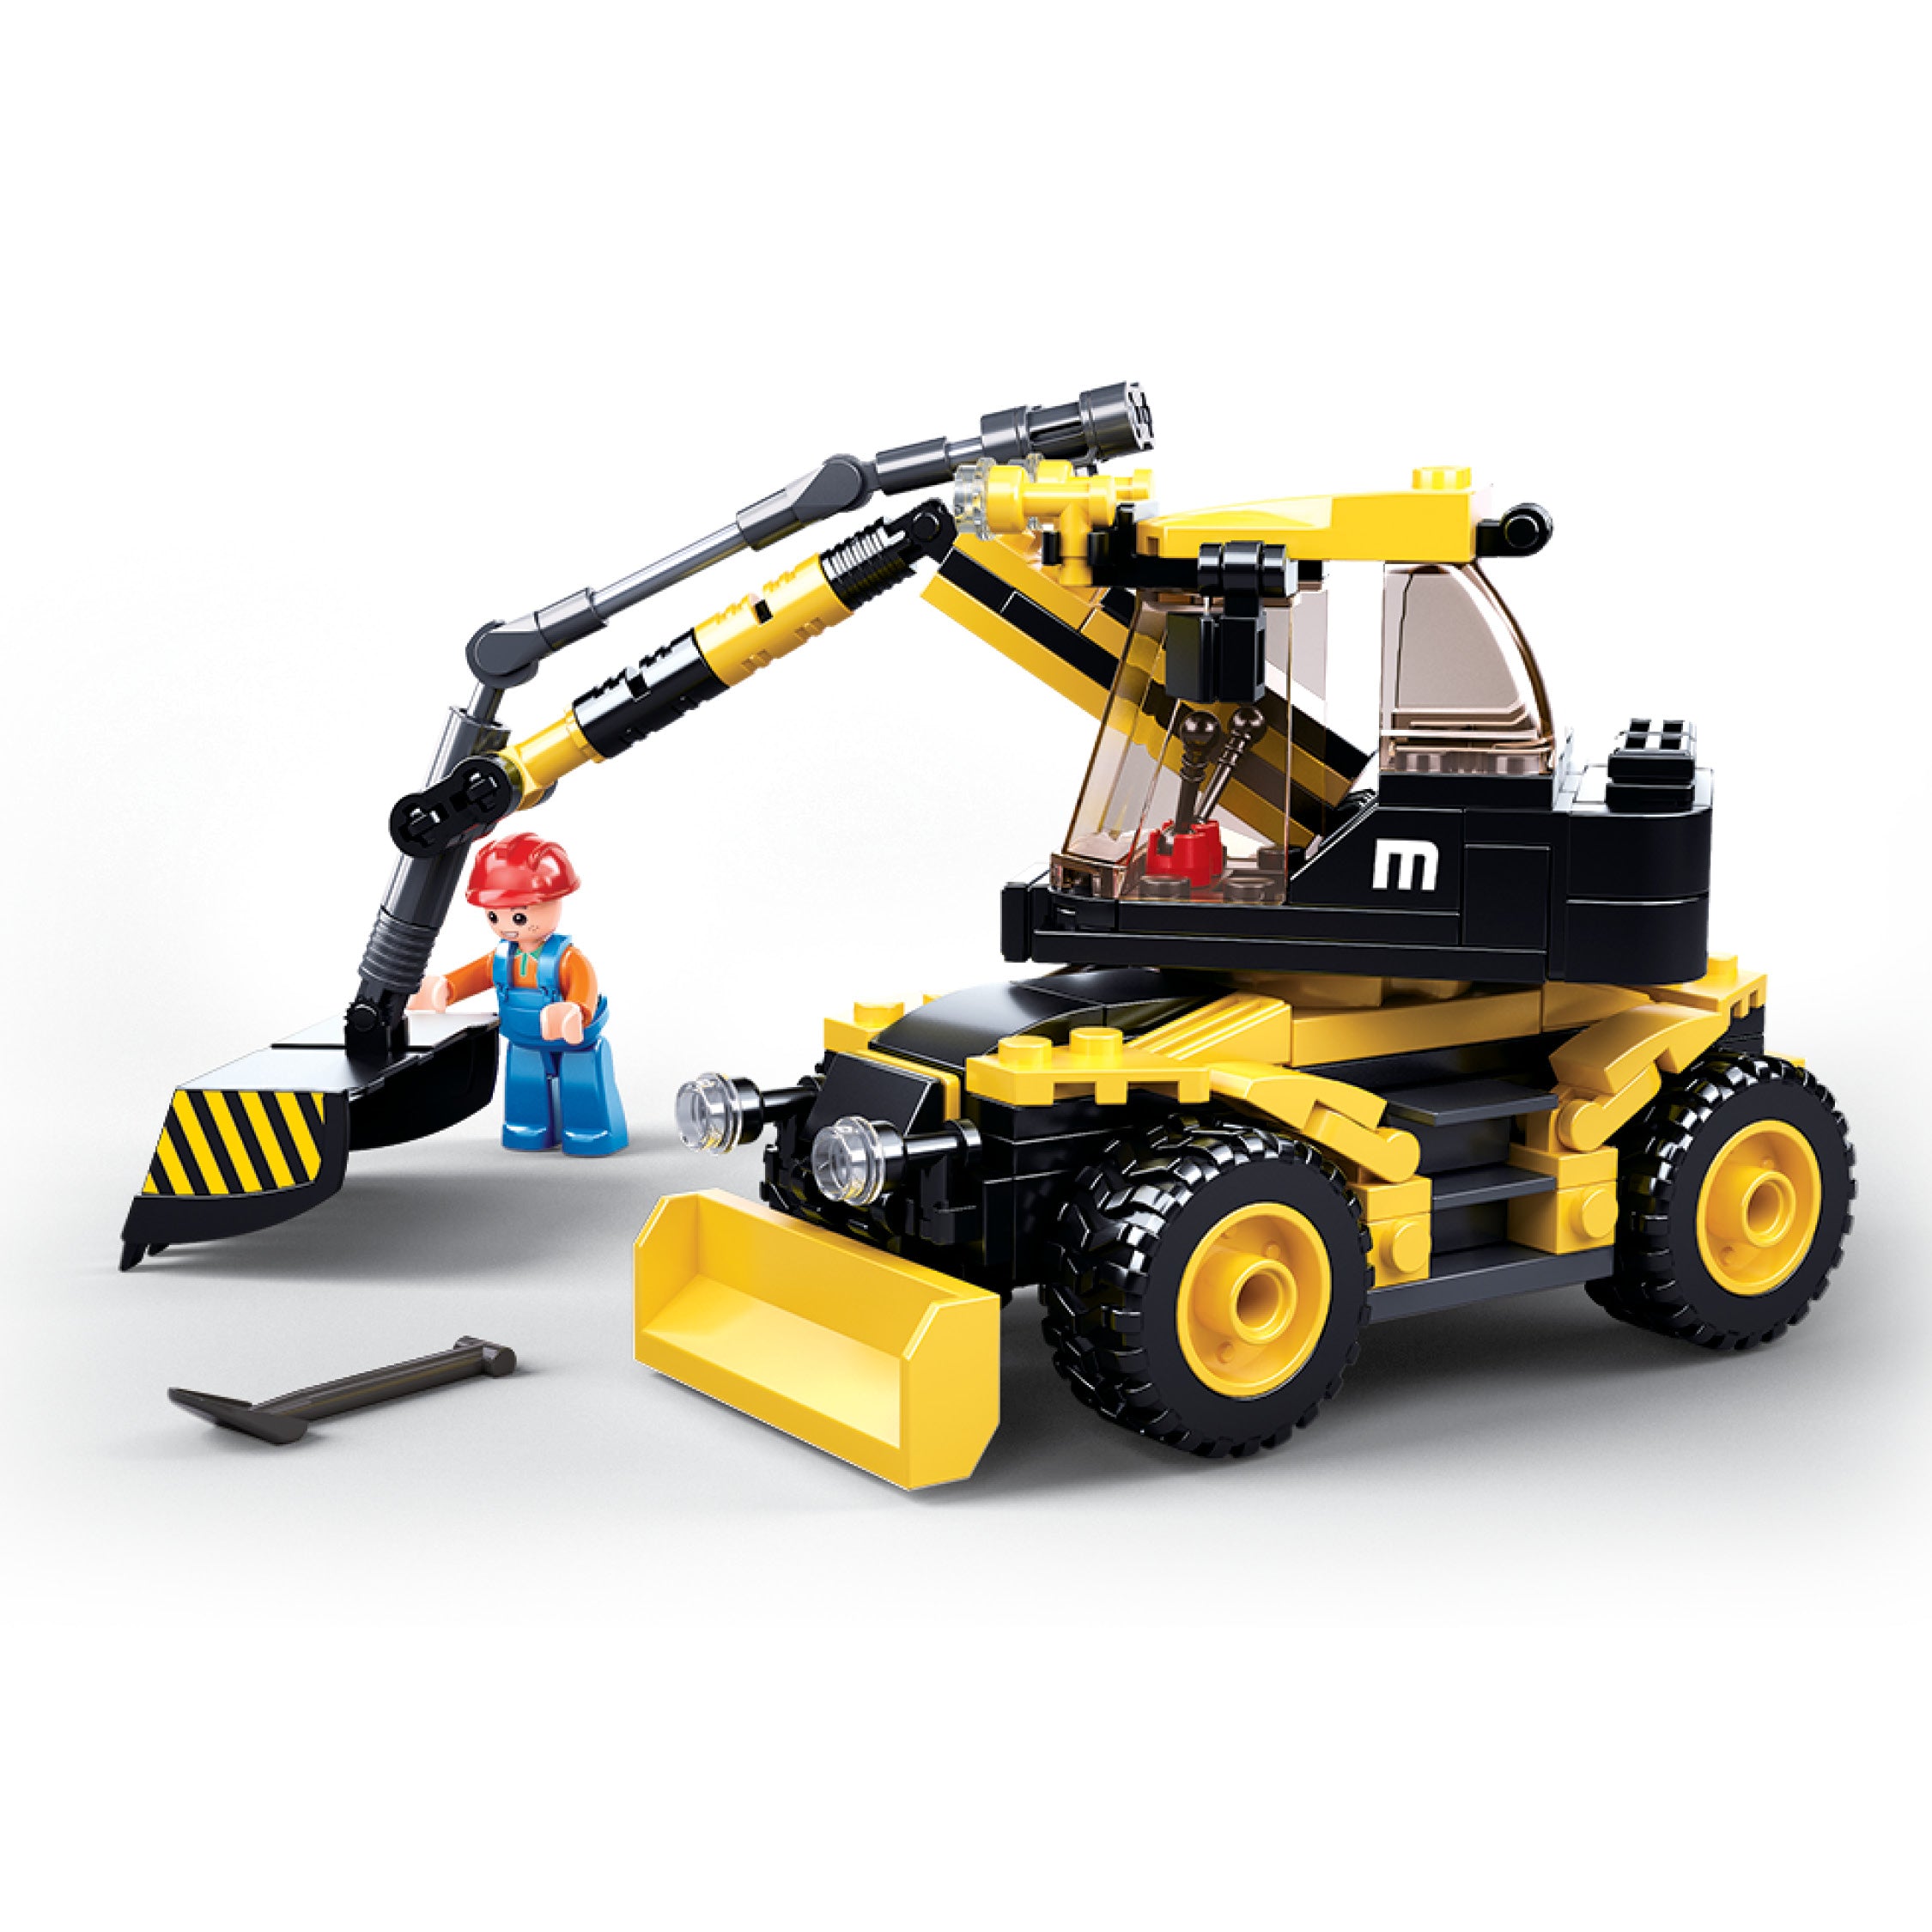 SLUBAN® EXCAVATOR 2 IN 1 (M38-B0805) (196 Pieces) Building Blocks Kit For Boys Aged 8 Years And Above Creative  Construction Set Educational STEM Toy